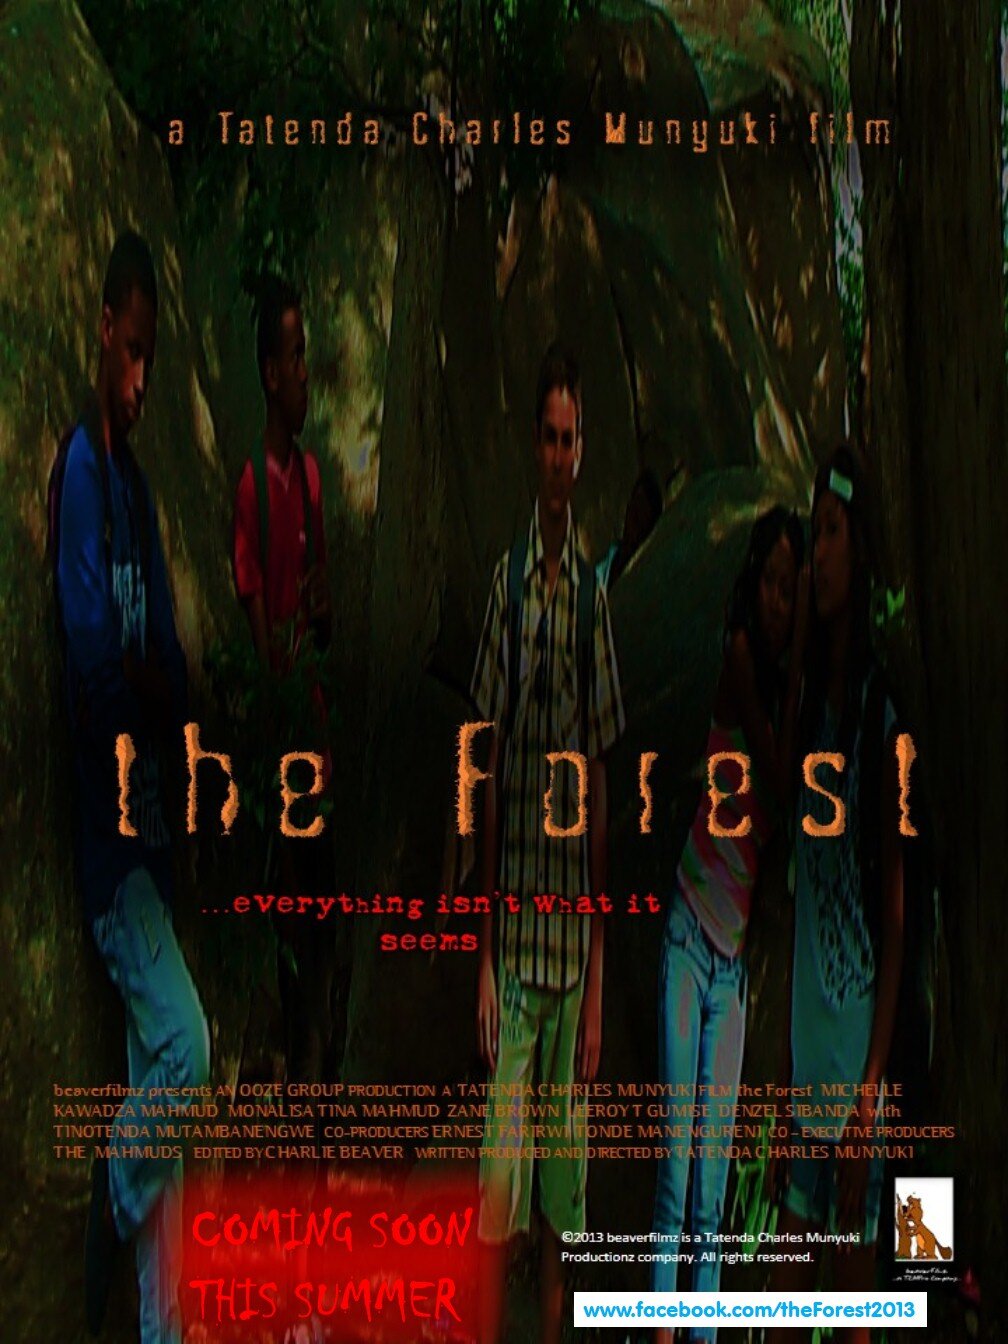 A movie about youths that venture into a forest to find their friend only to meet creepy and horrific anomalies...